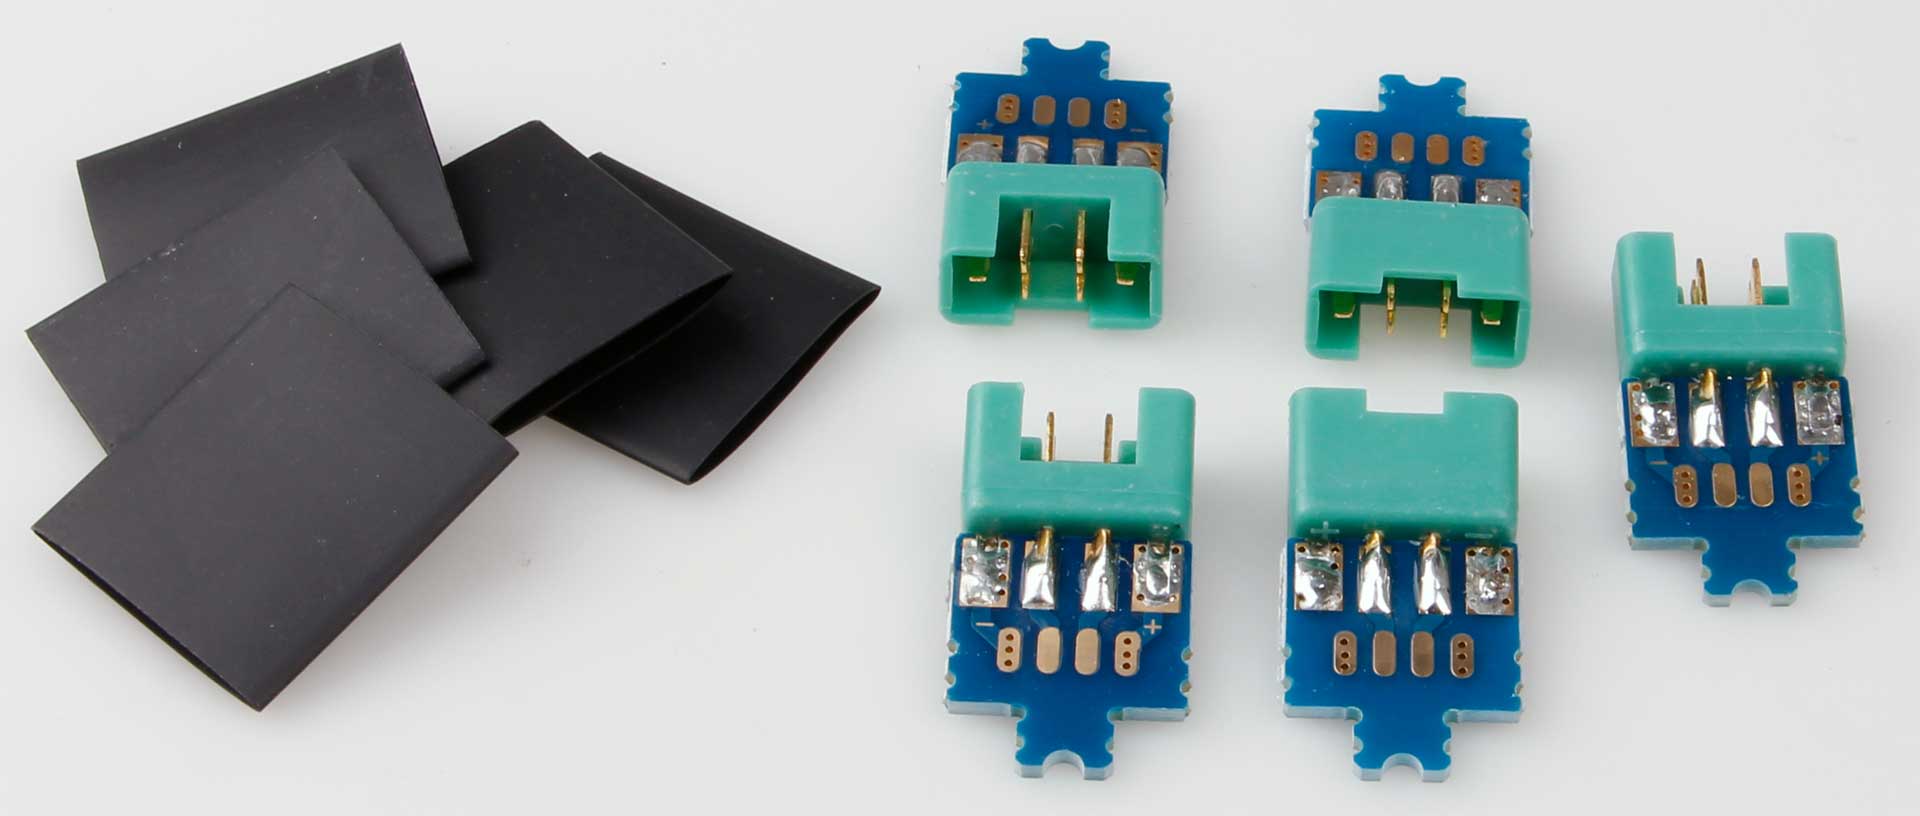 Robbe Modellsport Solder board 6-pin MPX high current connector System with plug (contact = plug) 5 pieces